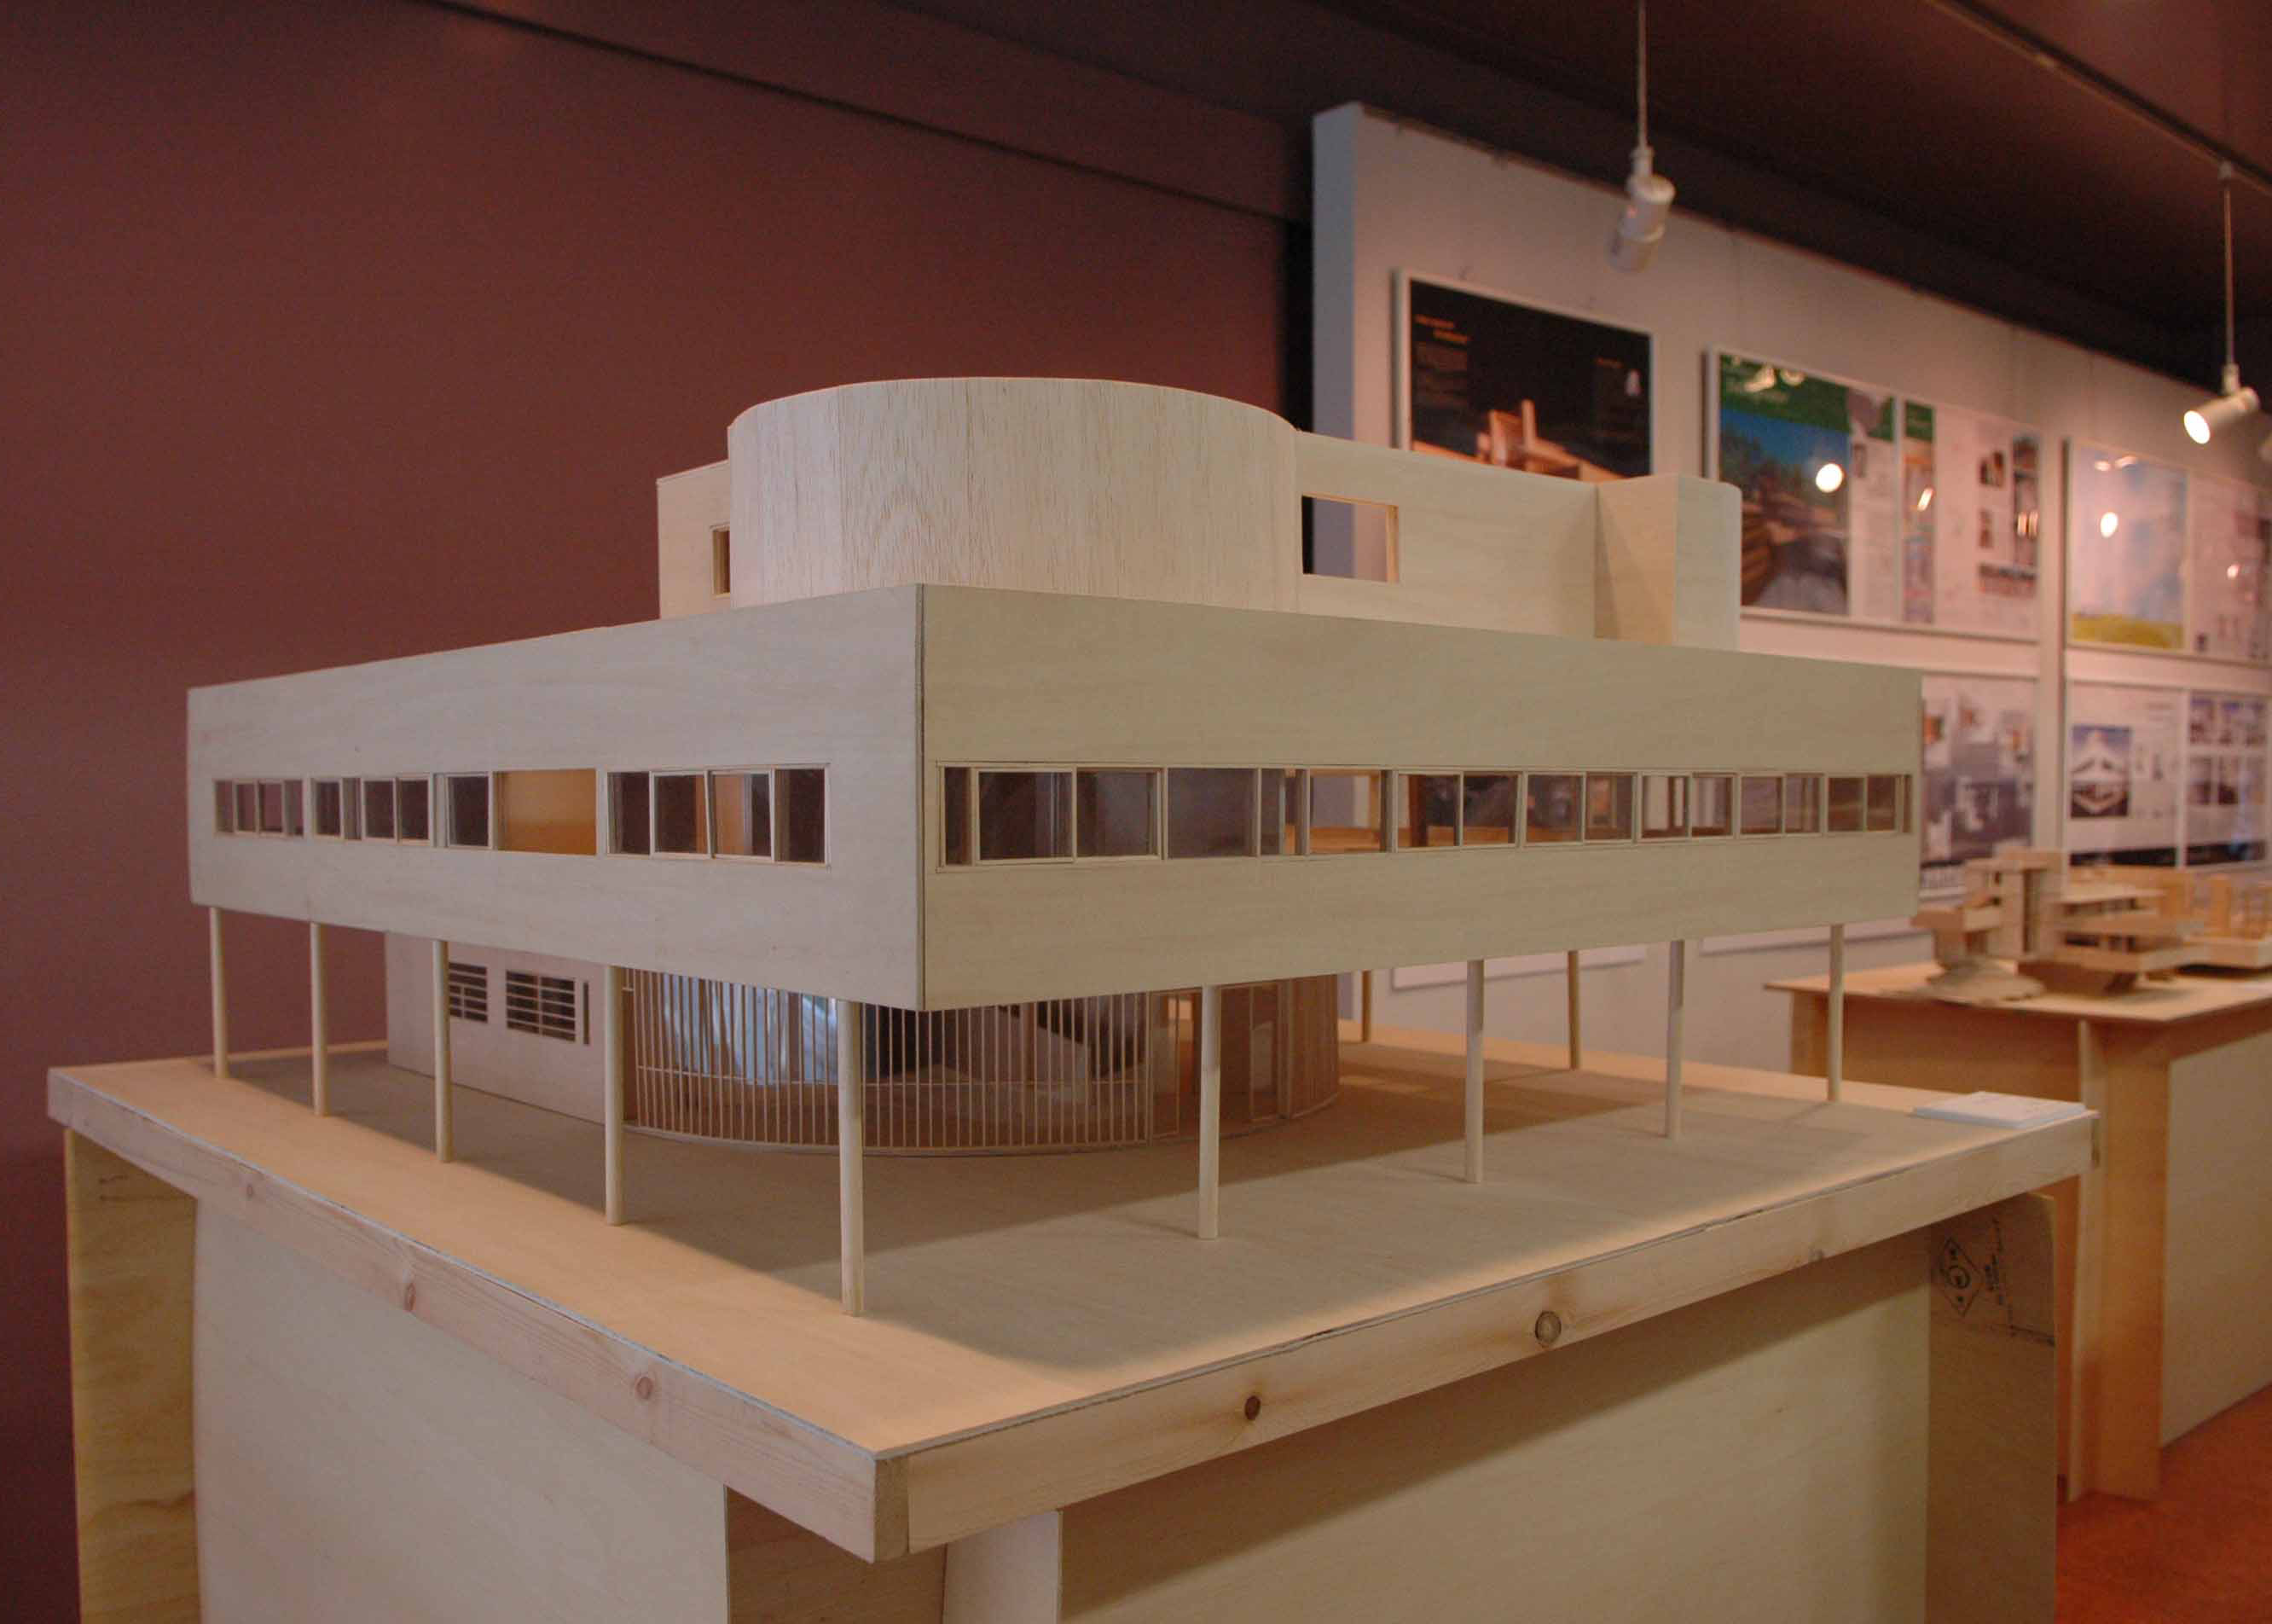 Analyzing Modernist Architecture with Models